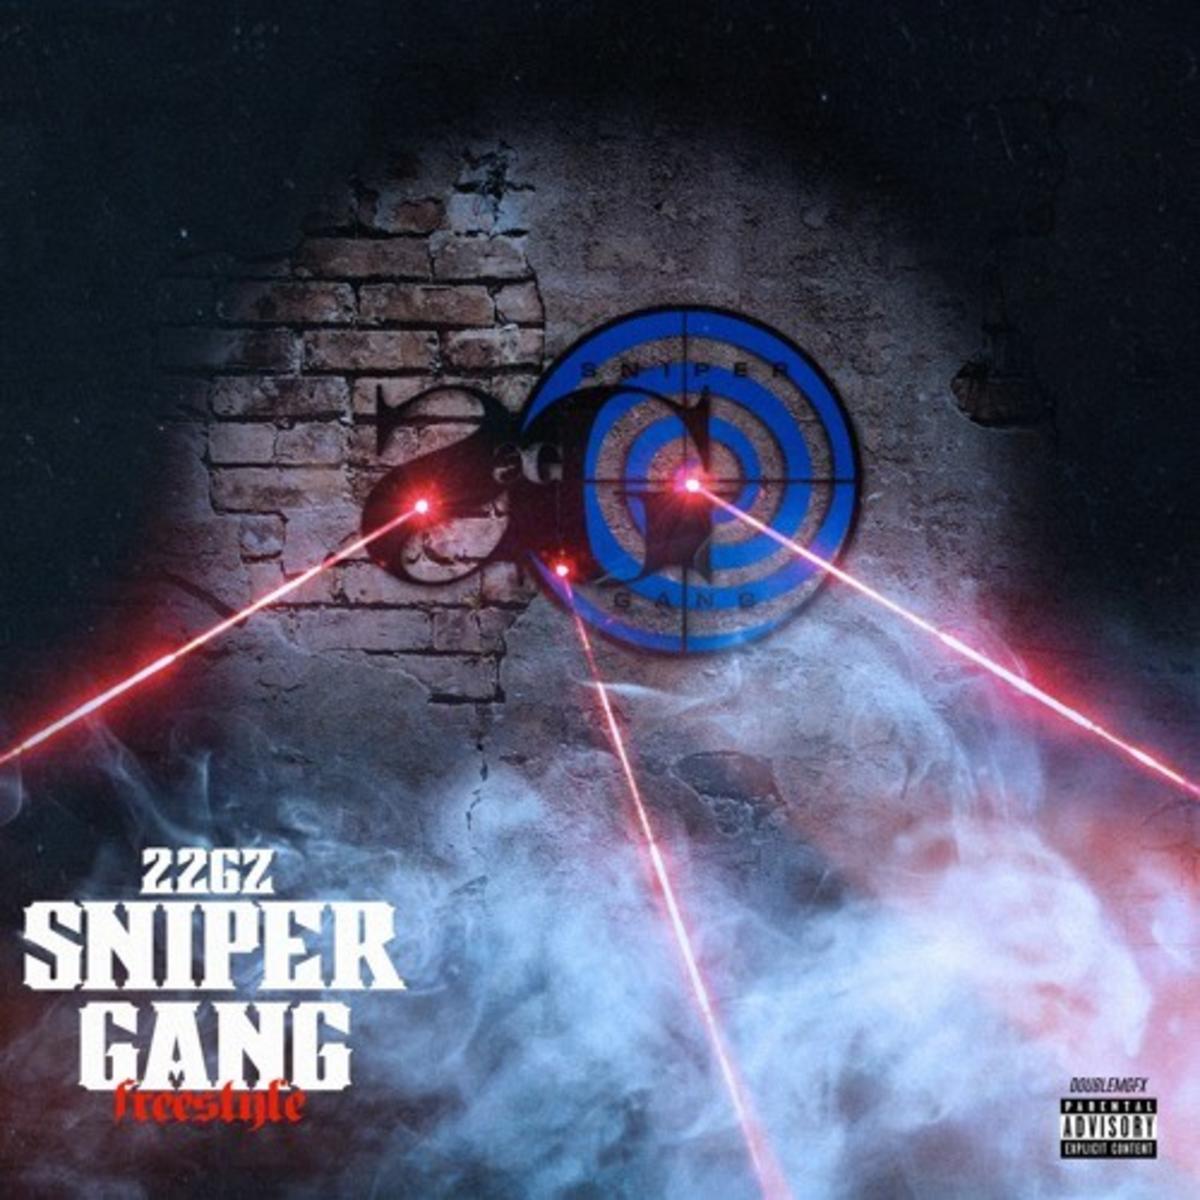 22Gz Disses Tory Lanez, 6ix9ine & G Herbo On Sniper Gang Freestyle